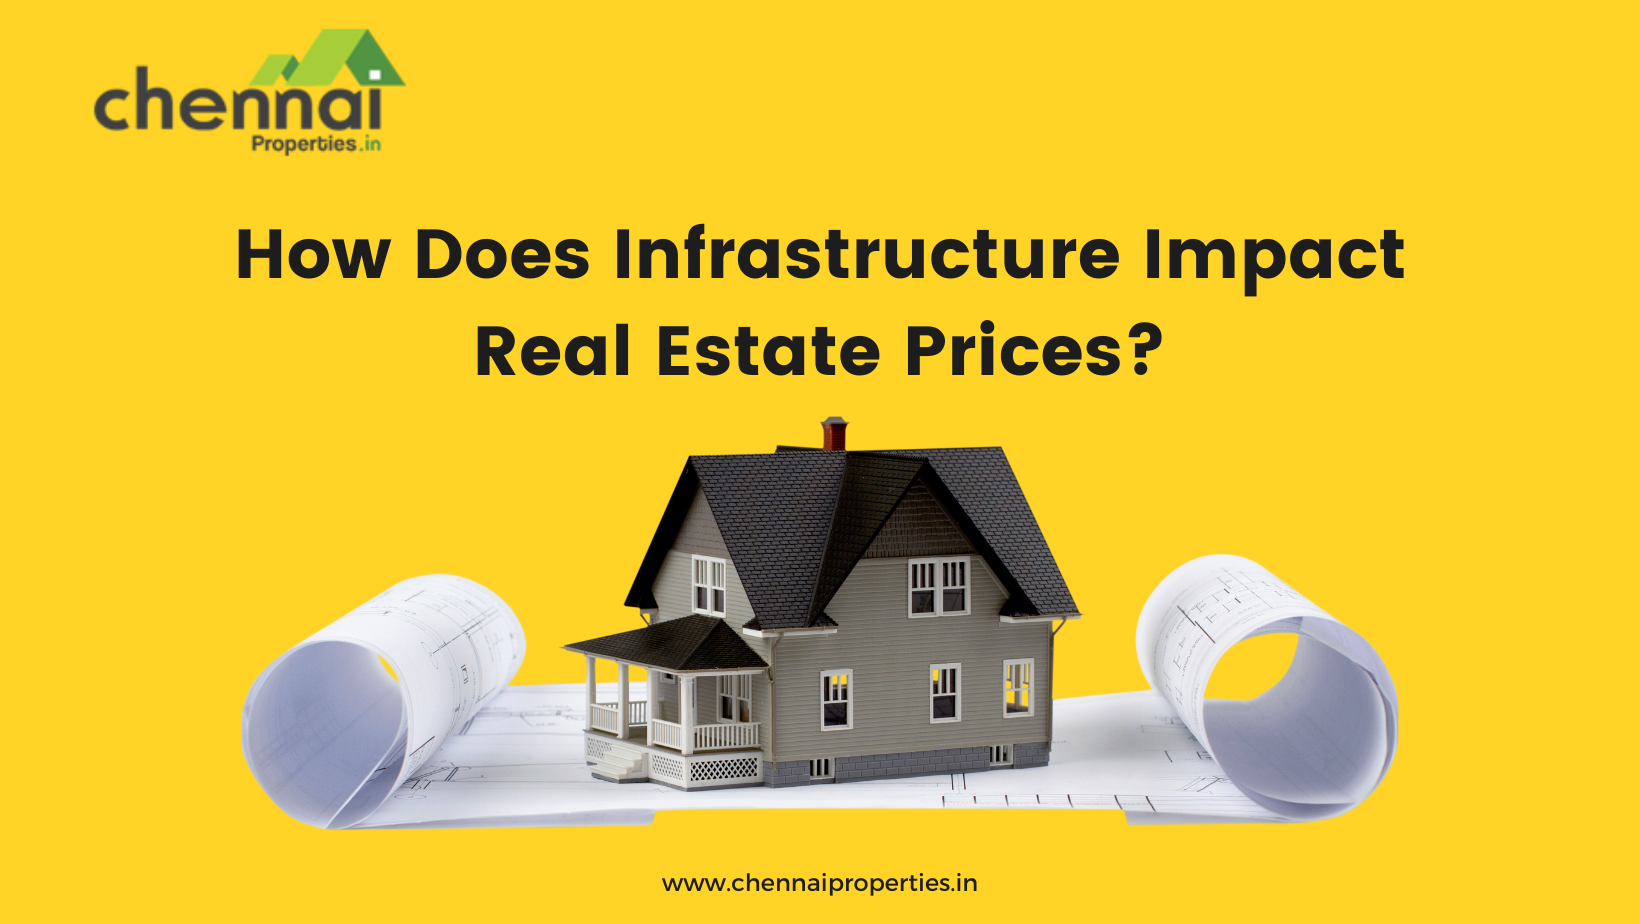 How does infrastructure impact real estate prices?